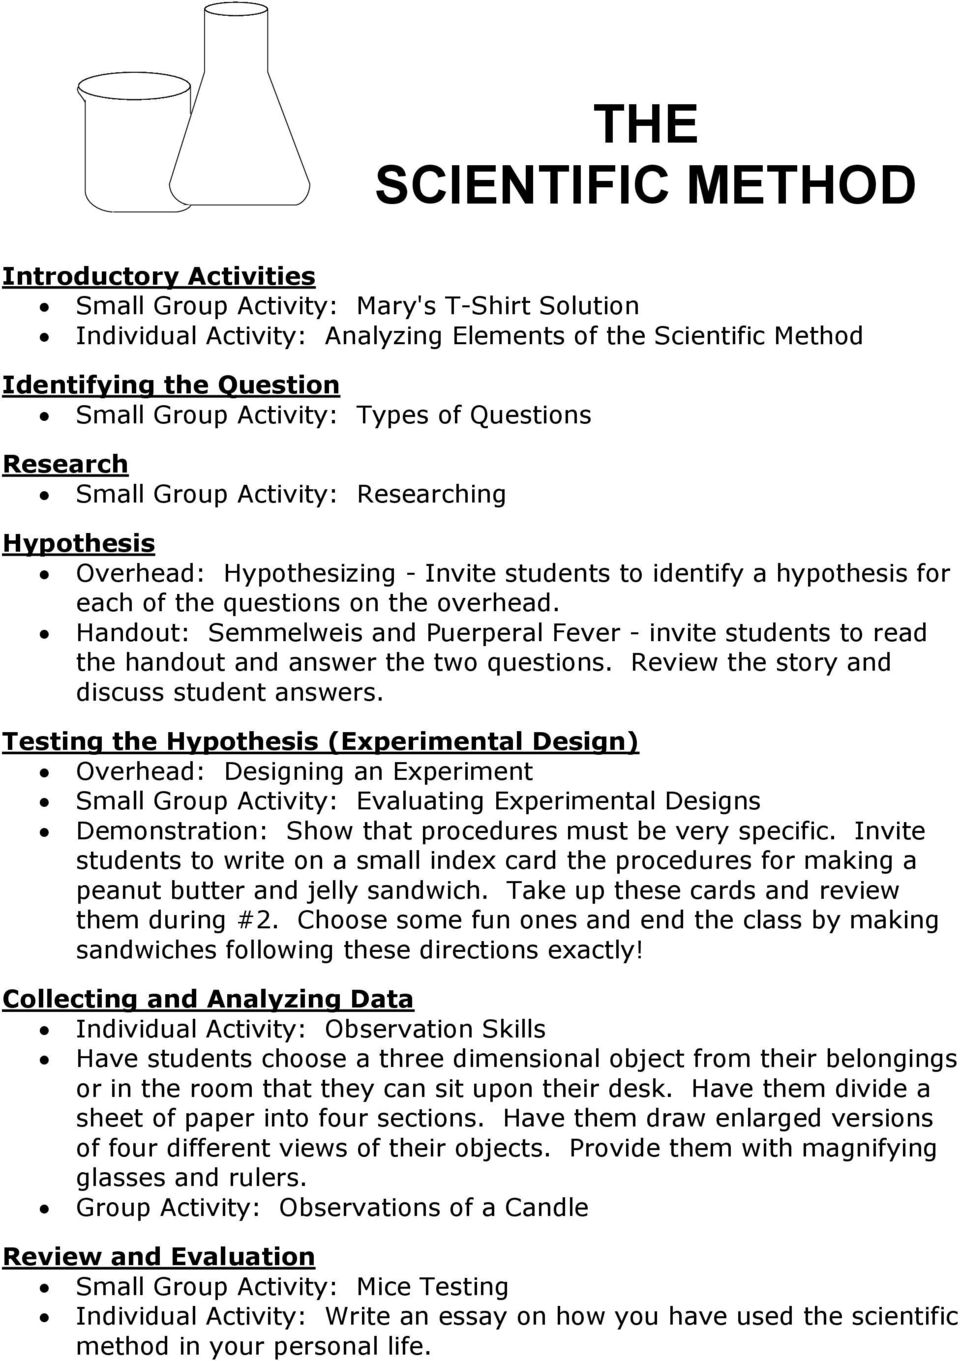 THE SCIENTIFIC METHOD - PDF Free Download Throughout Scientific Method Story Worksheet Answers